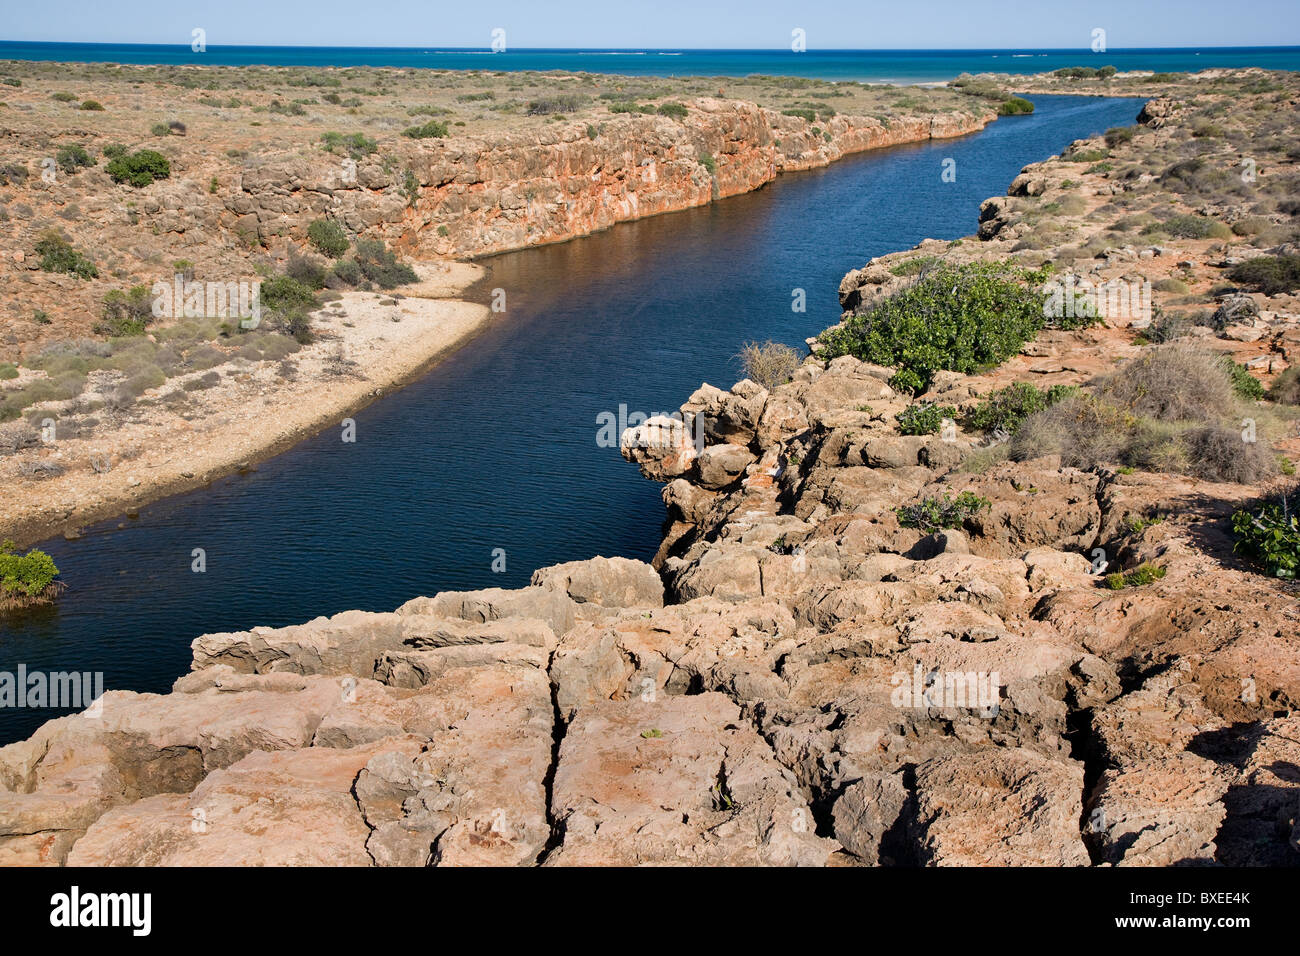 Yardie Creek in the Cape Range National Park near Exmouth is a cool estuary of brackish water in a dry barren bush landscape Stock Photo